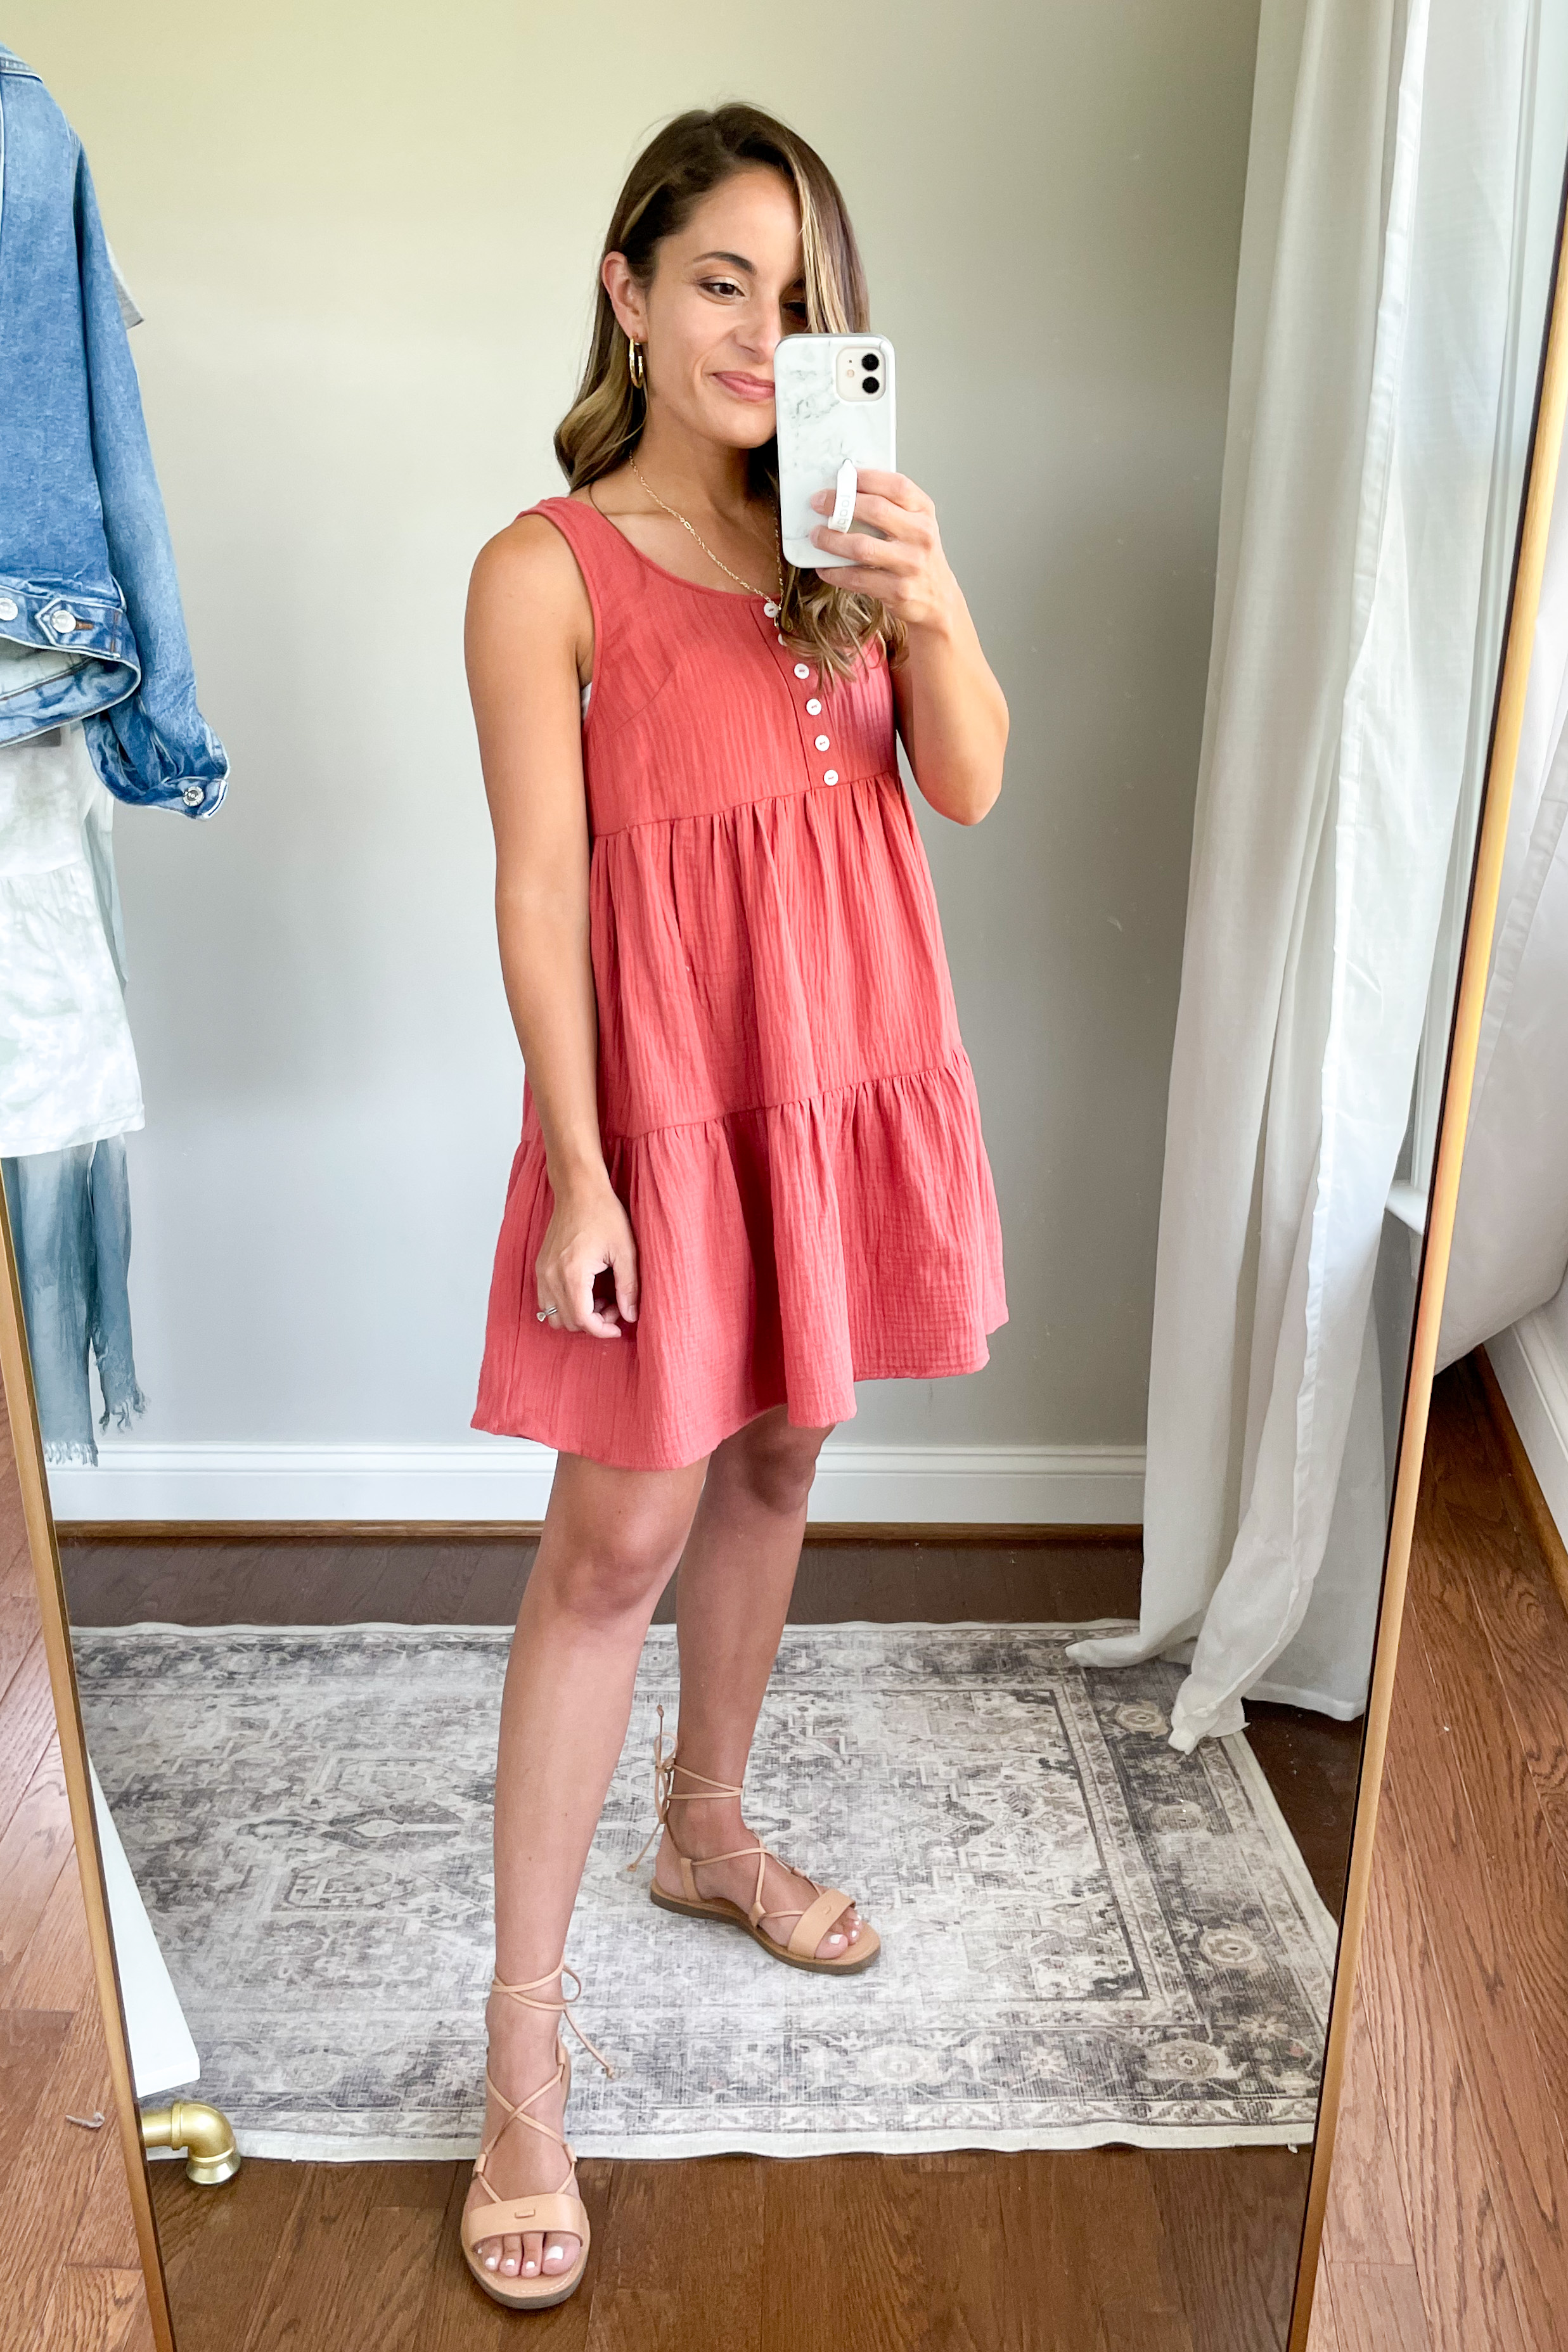 Petite summer outfits | petite style |  summer fashion | red dress outfits | 10 items 20 outfits 